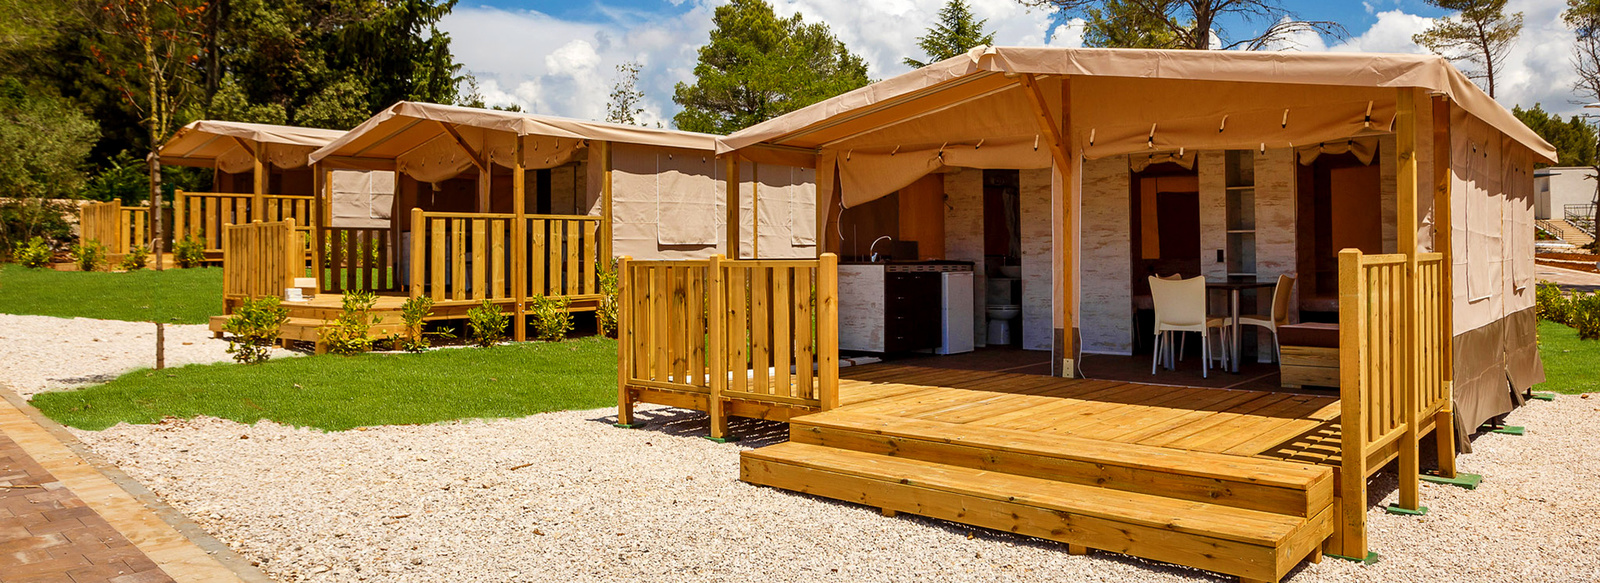 nuovo glamping 5* in Istria